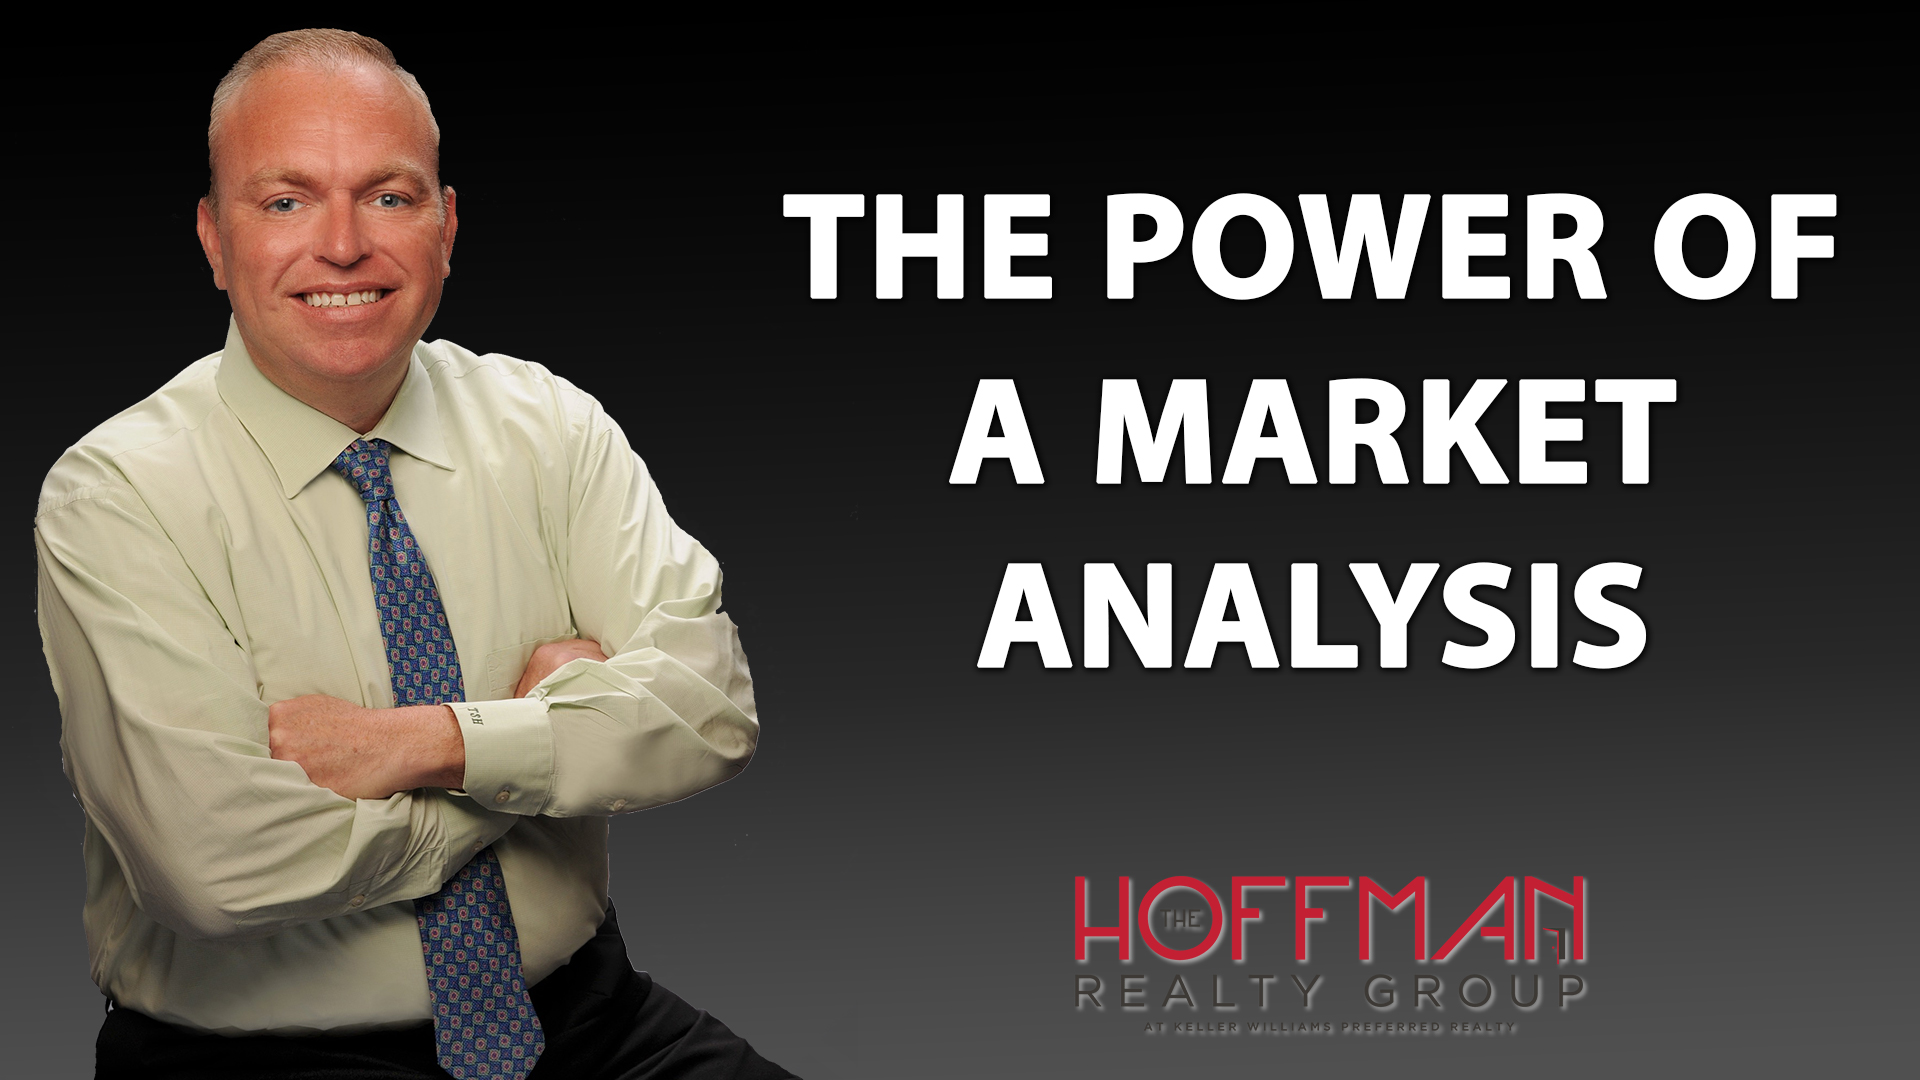 Q: What Is a Market Analysis?